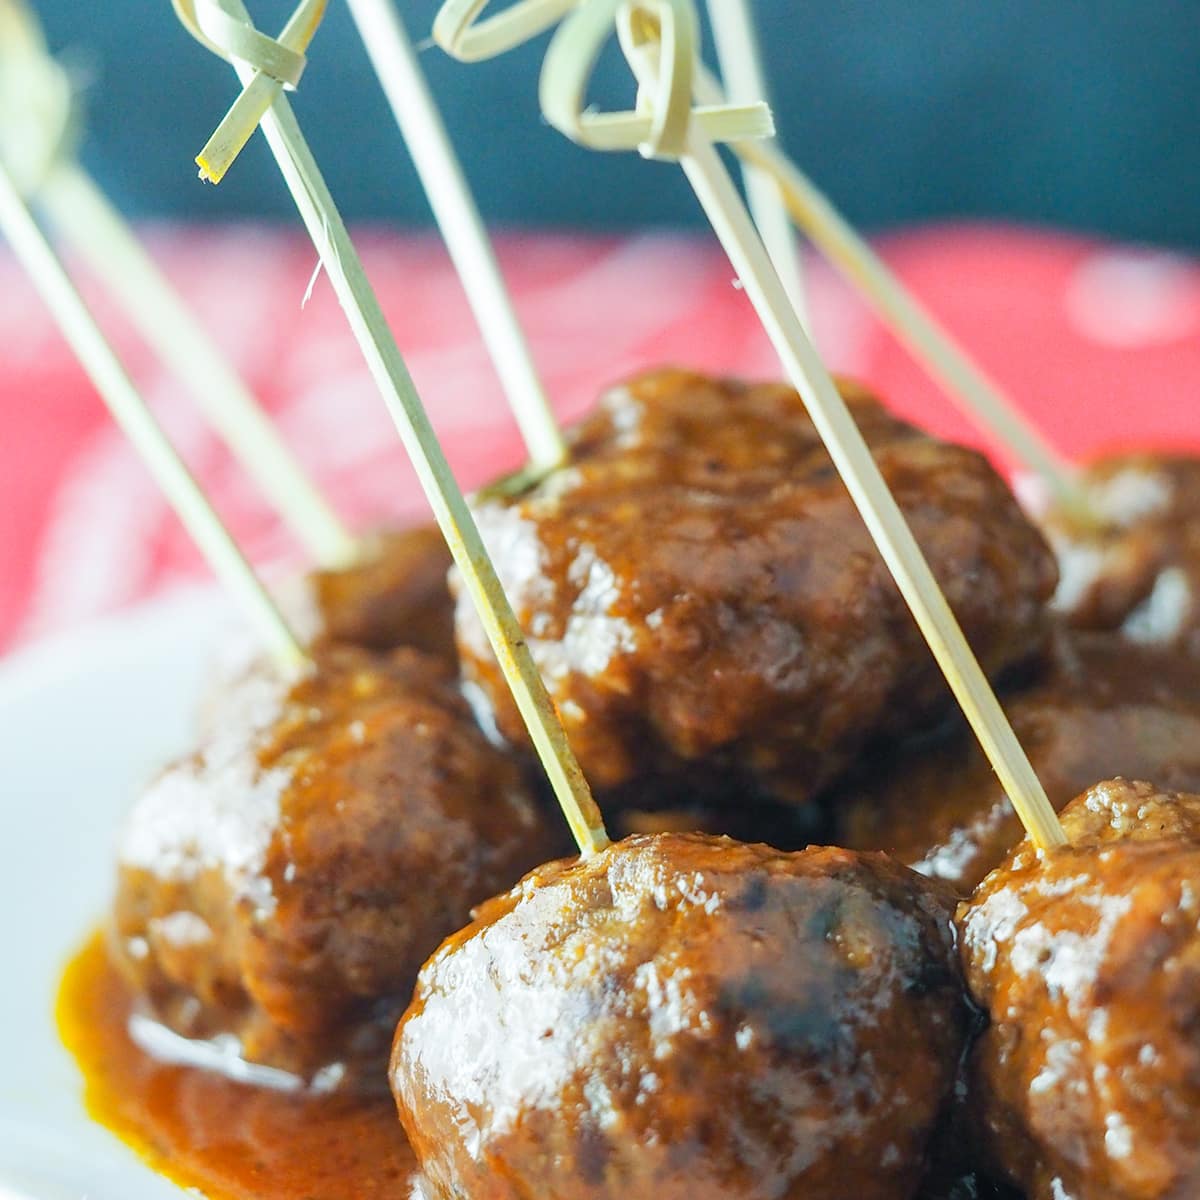 meatballs on plate with toothpicks for serving